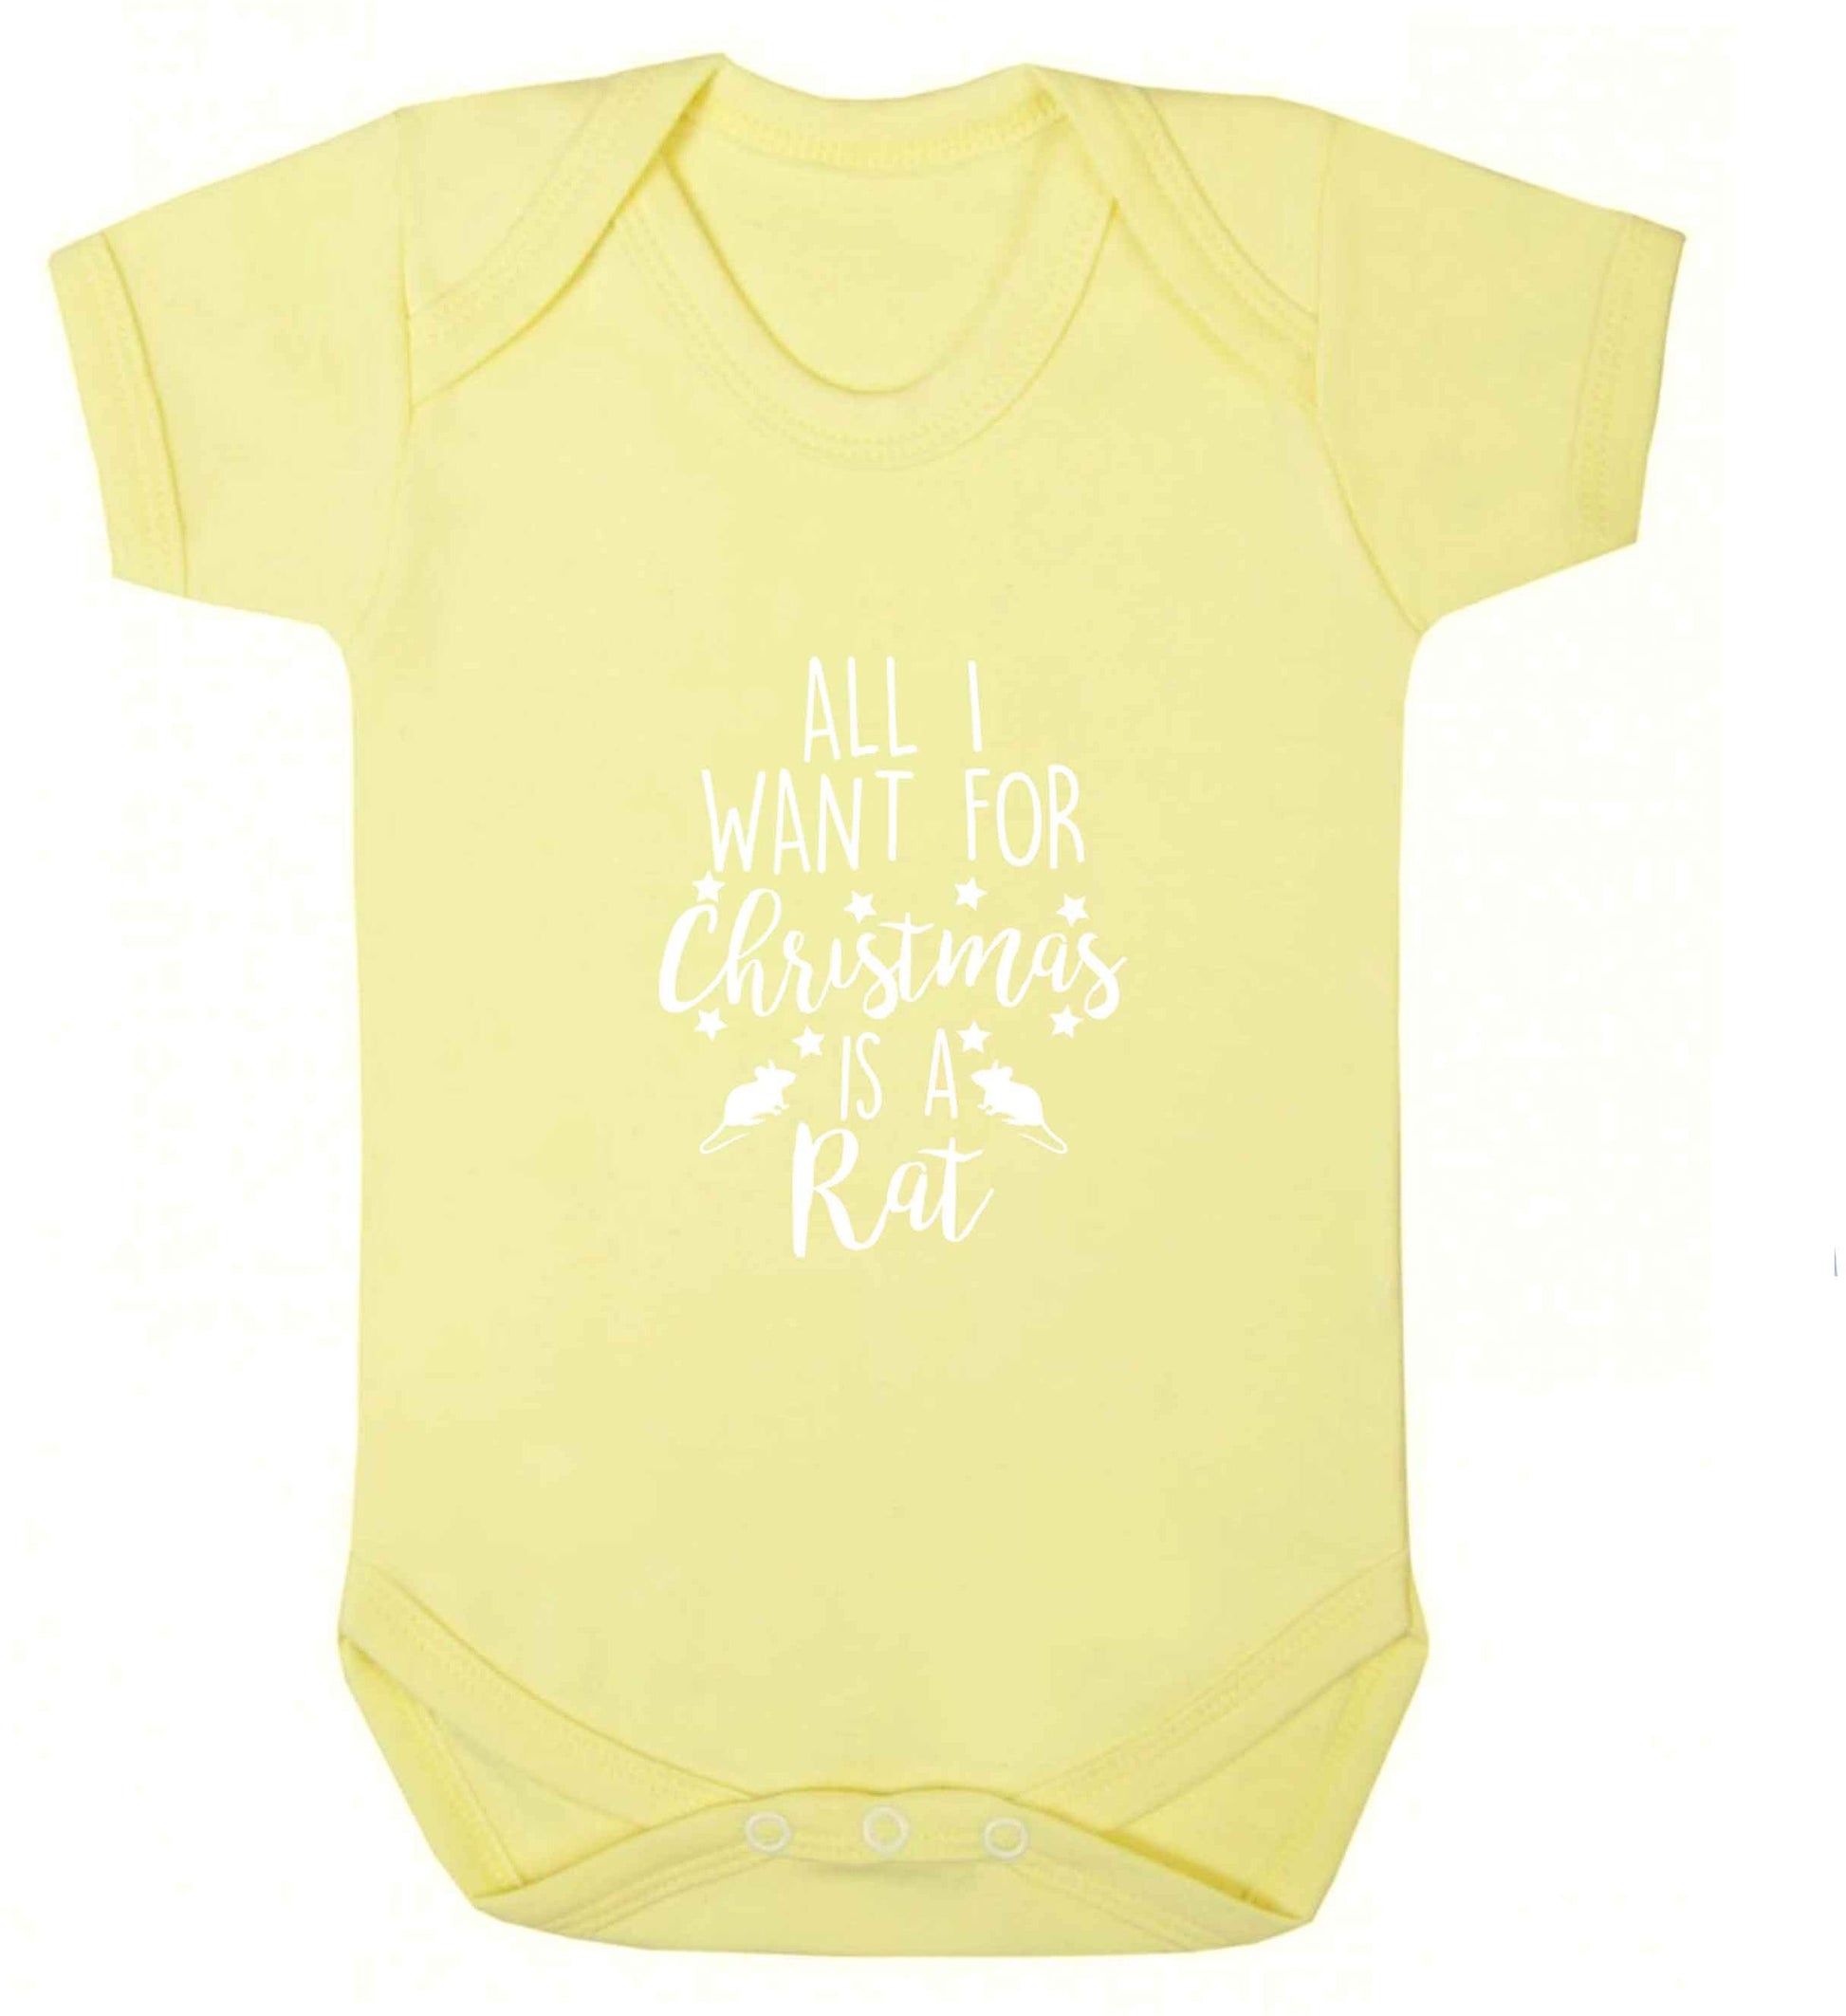 All I want for Christmas is a rat baby vest pale yellow 18-24 months